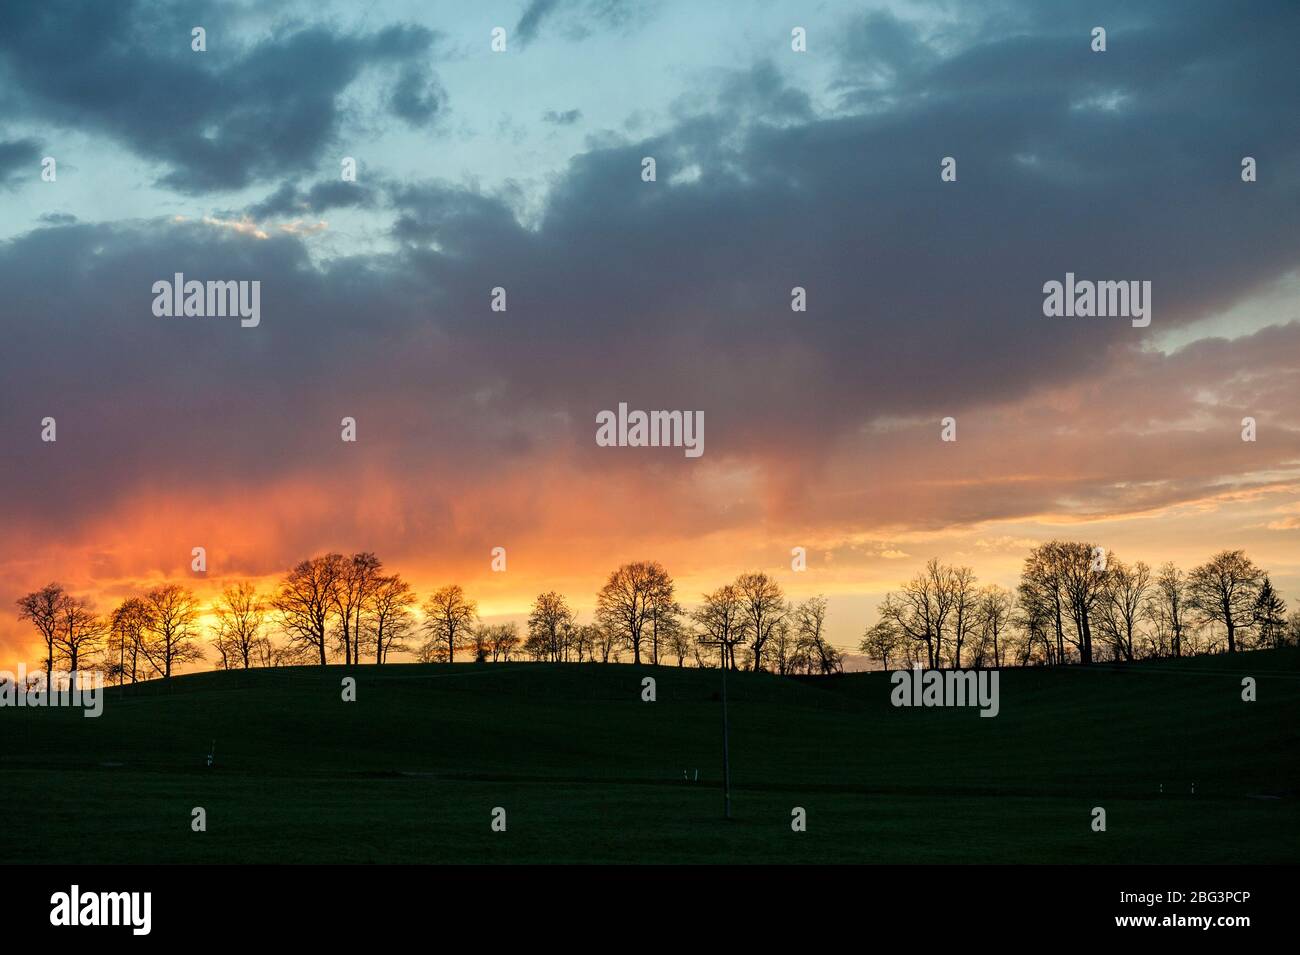 Bavarian Landscape with Line of Trees Stock Photo